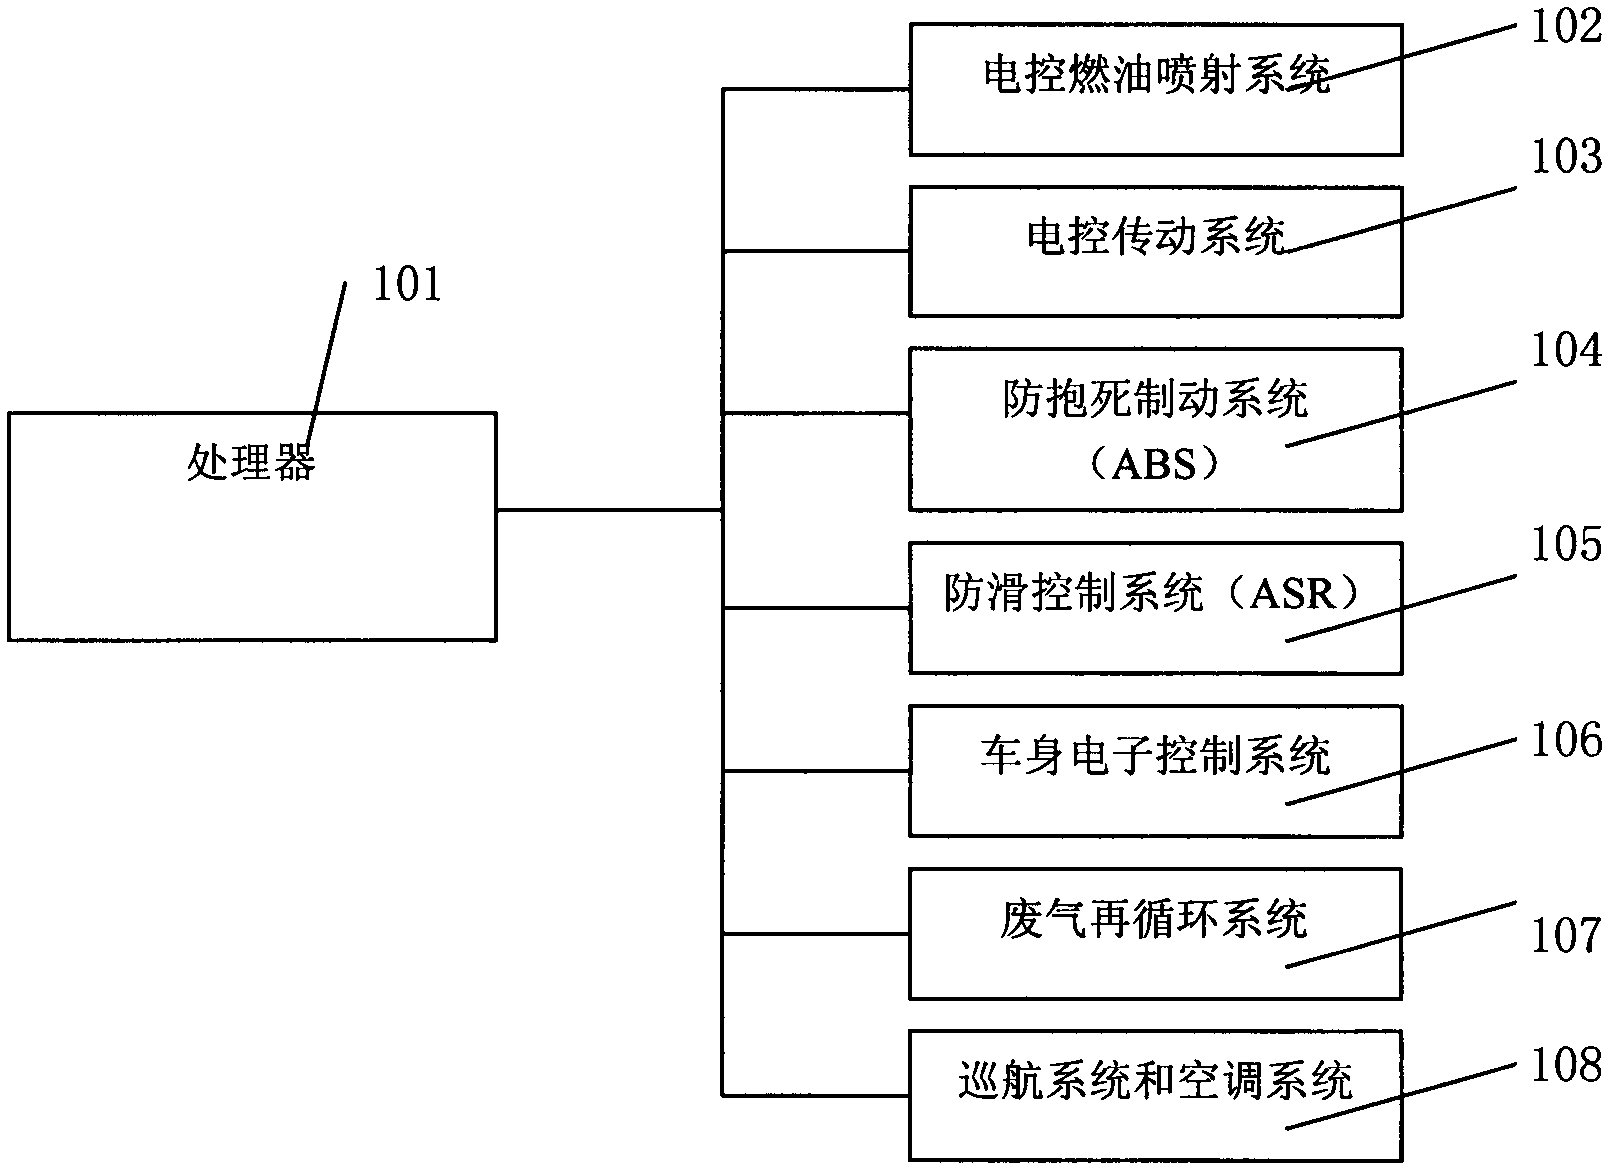 Vehicle information terminal realization device